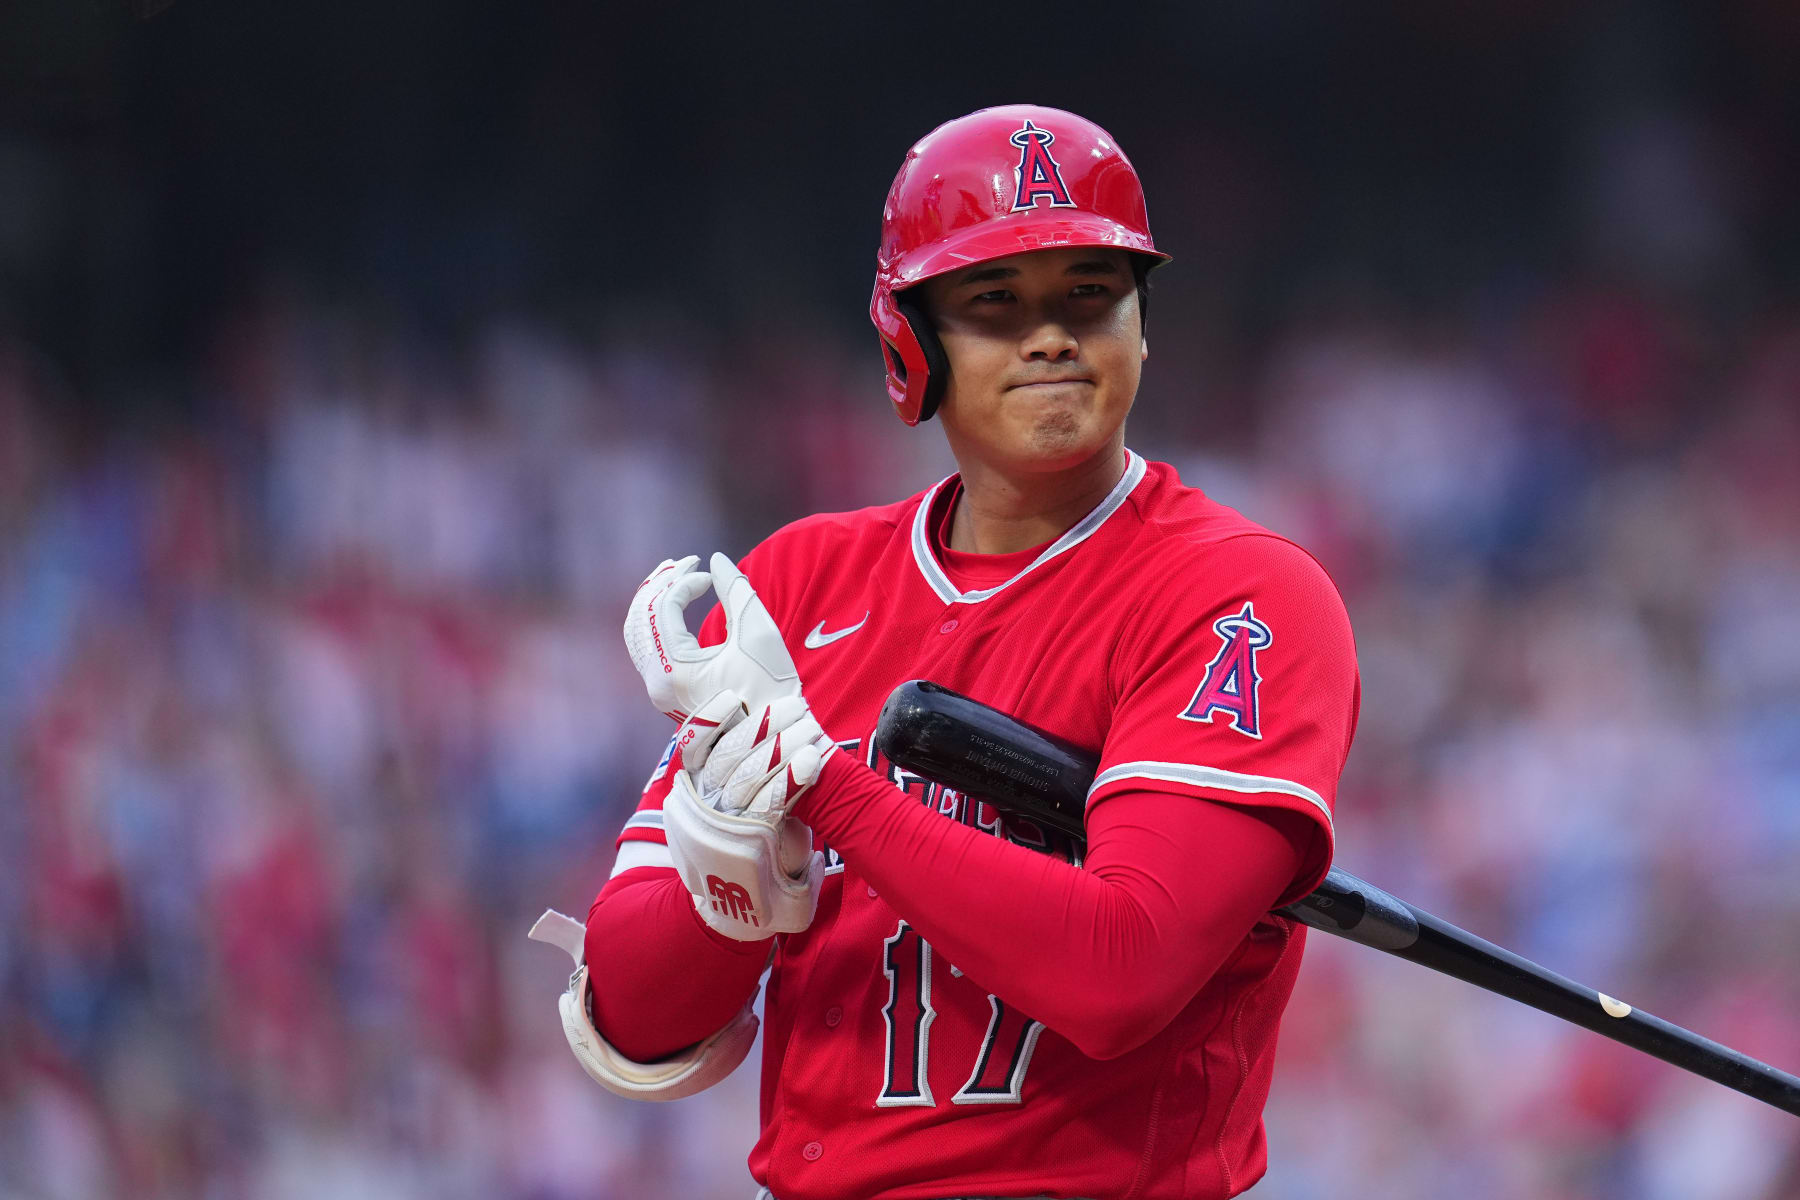 2022 MLB Injury Report May 23: Freddy Peralta Lands on IL, Aroldis Chapman  Dealing with Injury